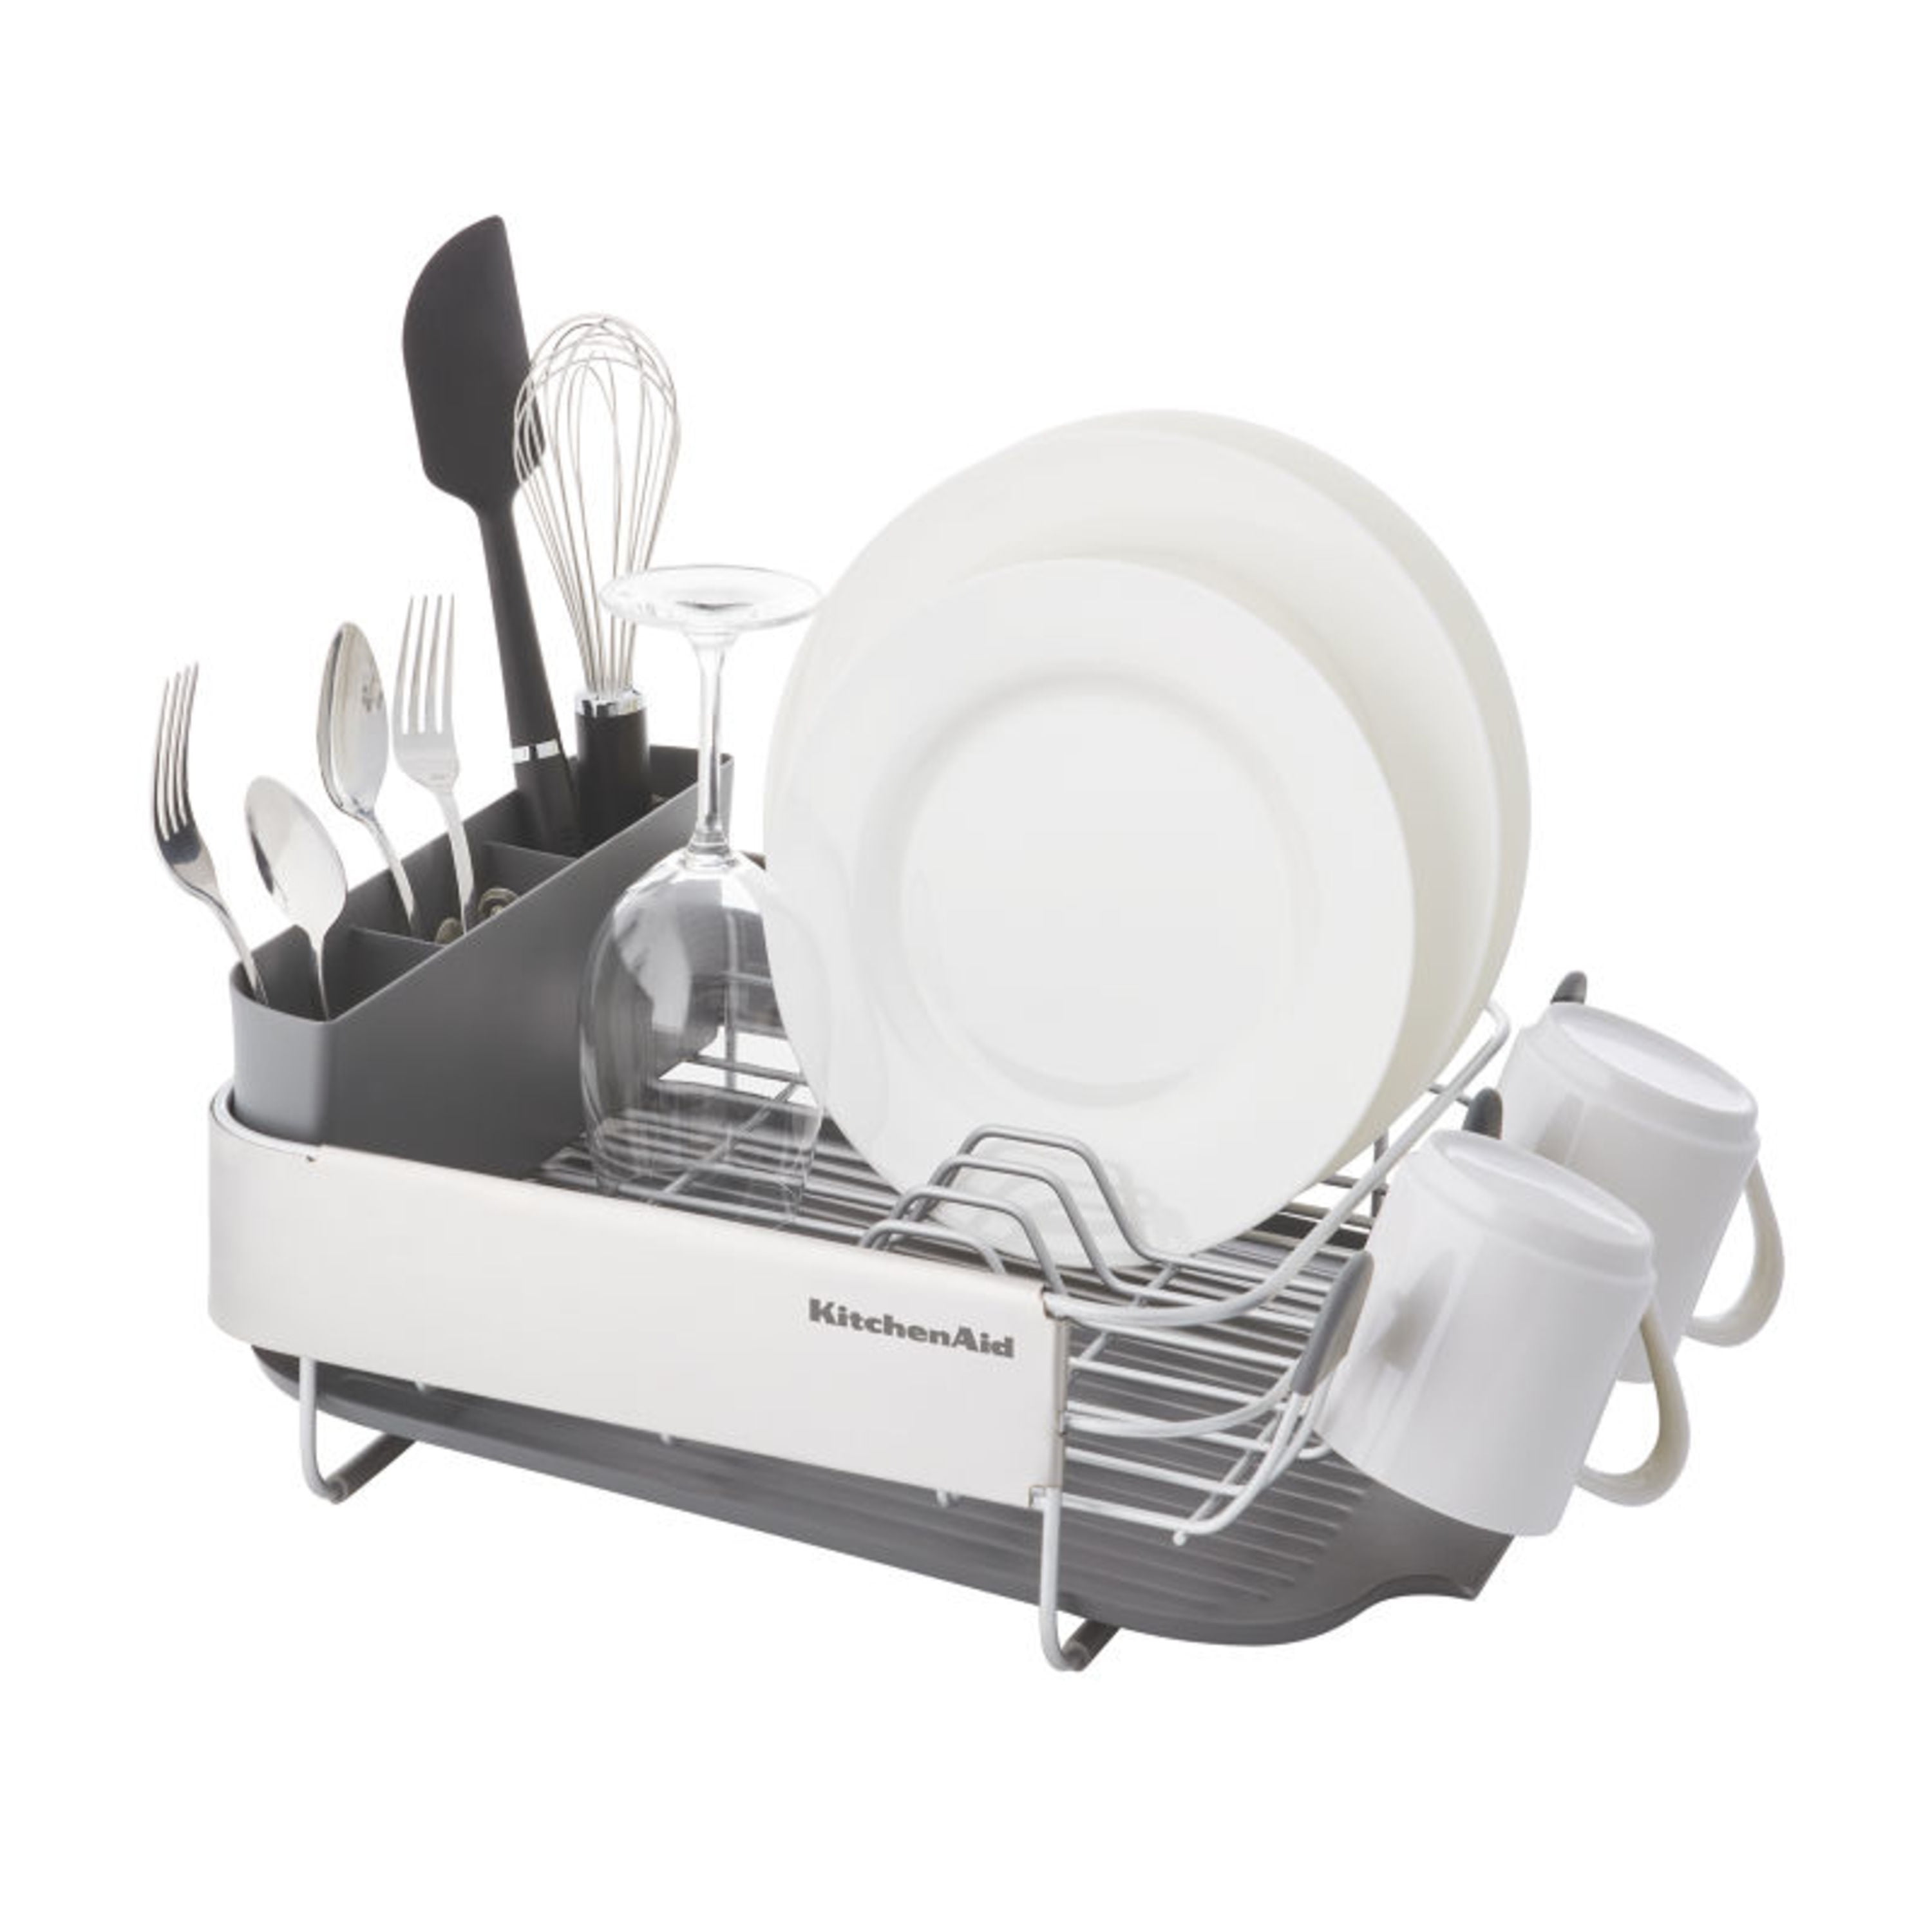  KitchenAid Compact Space Saving, Dish Rack with Removable  Flatware Caddy and Angled Self Draining Drainboard, Satin Gray,  15-Inch-by-13.25-Inch: Home & Kitchen